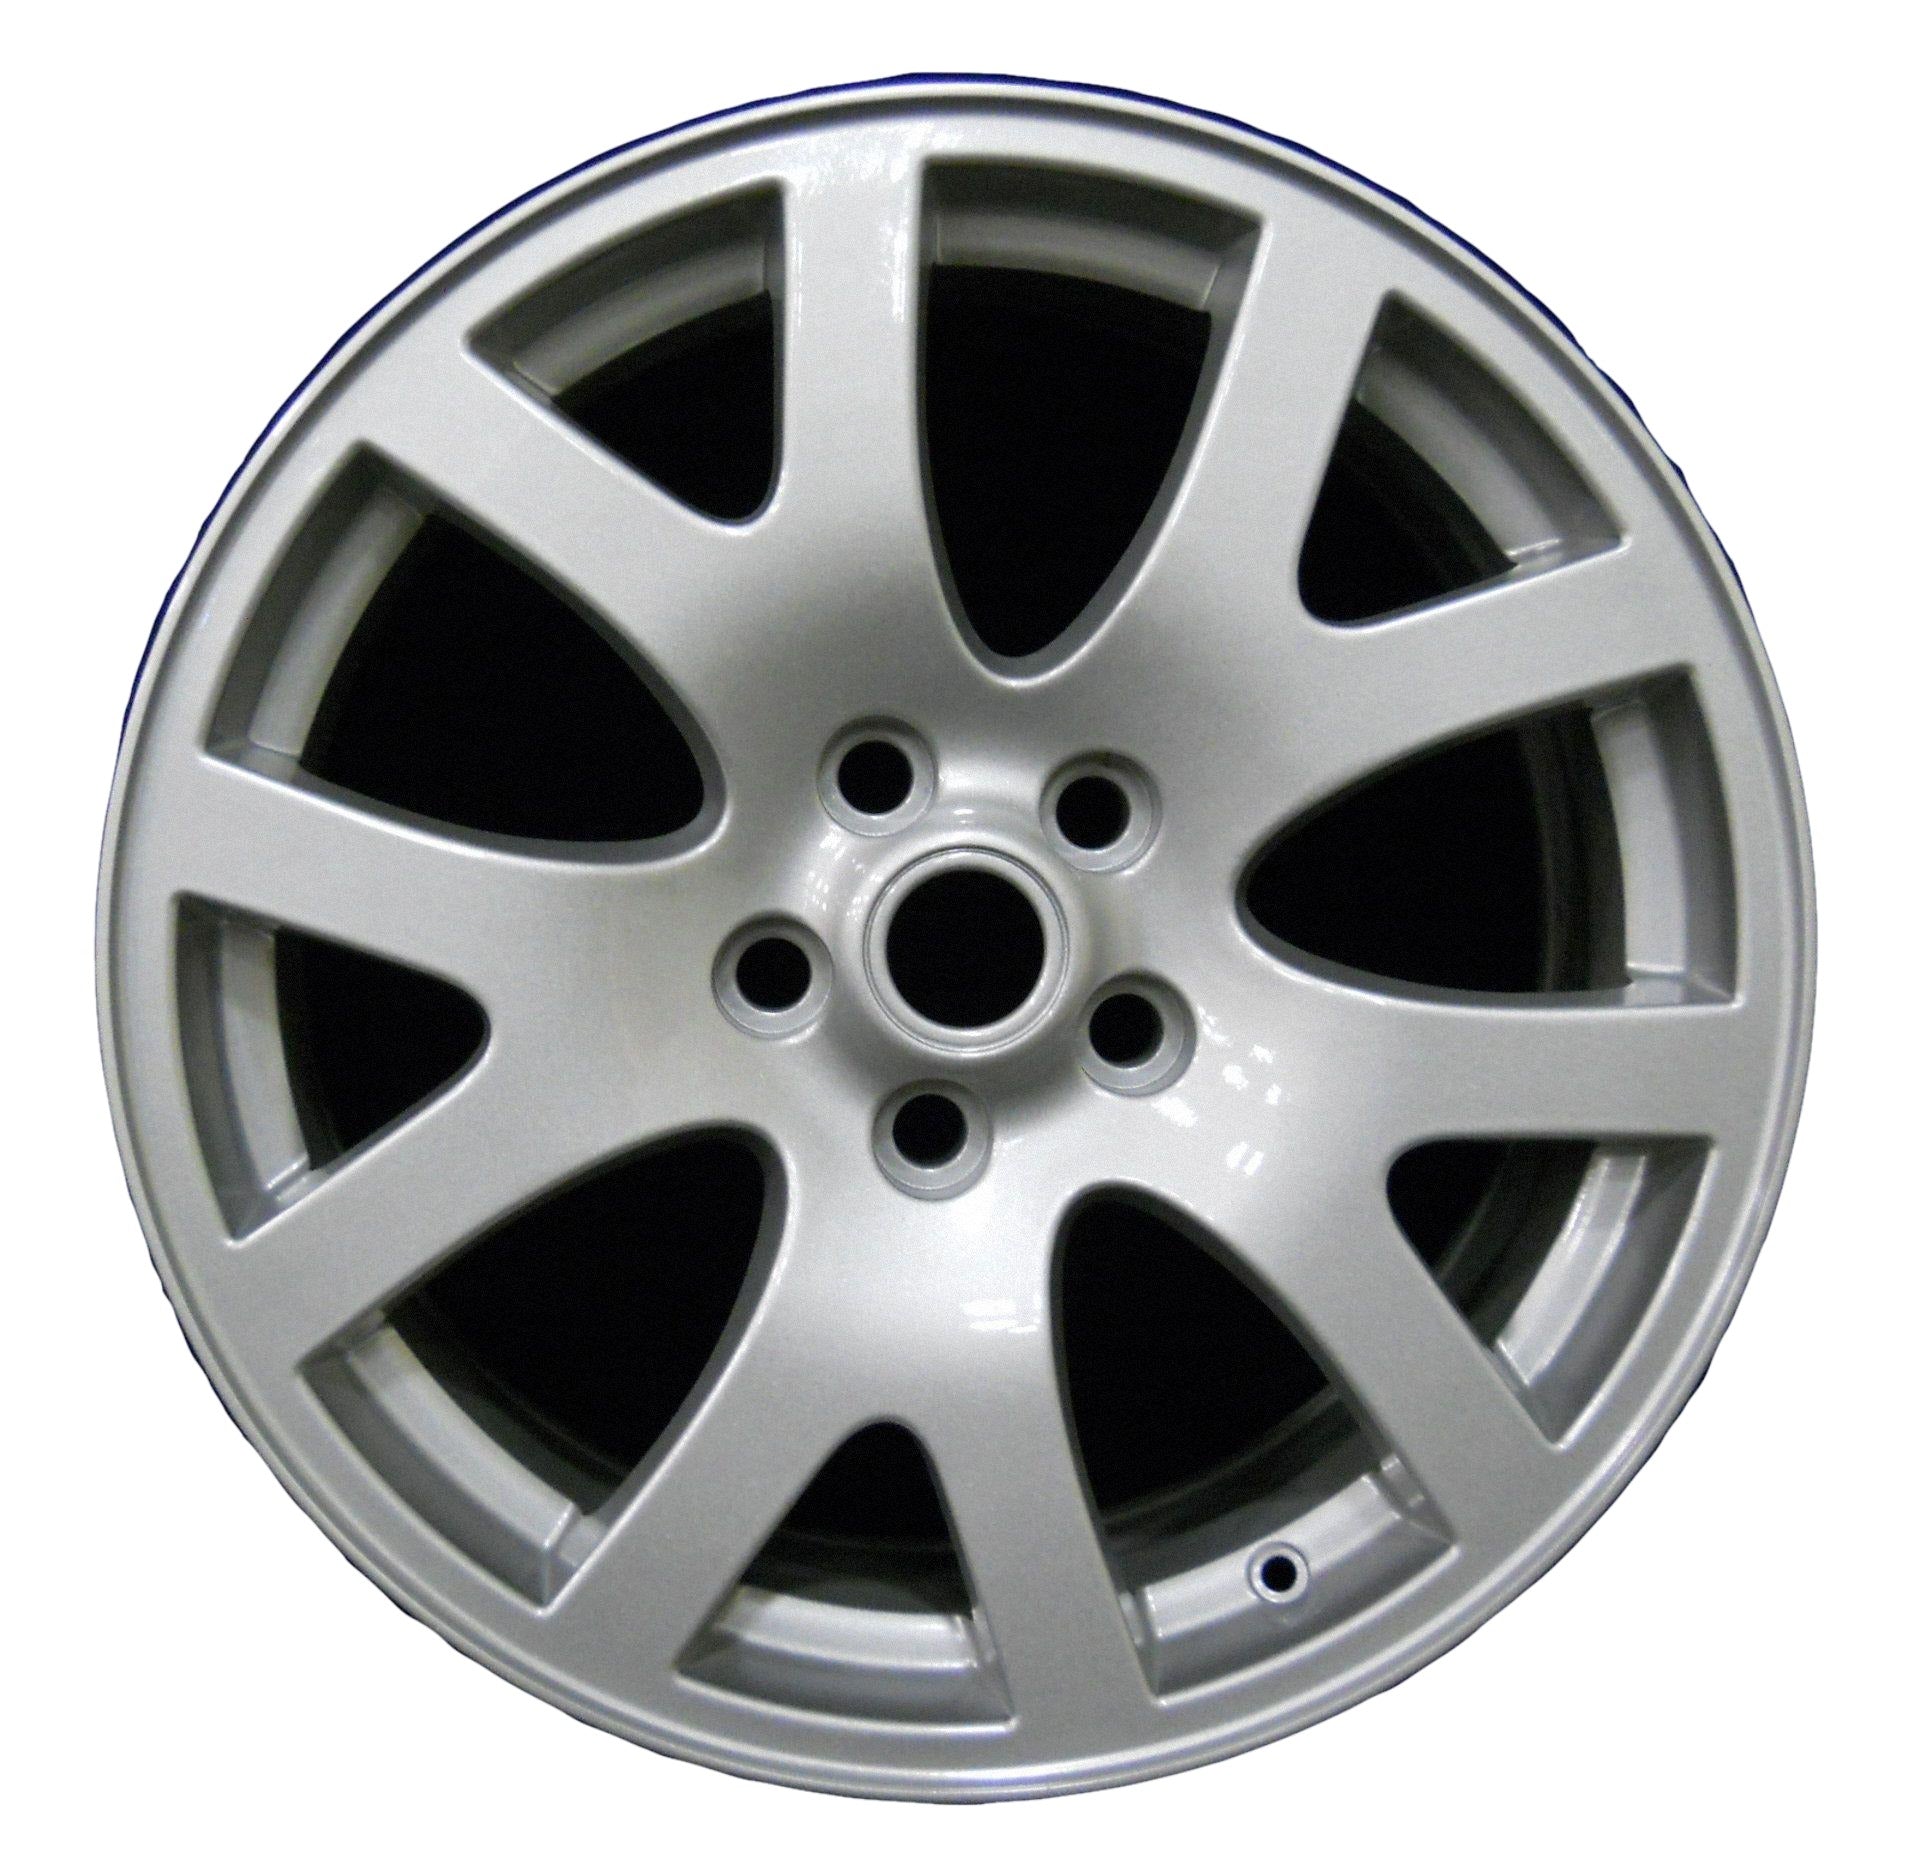 Land Rover Range Rover Sport  2006, 2007, 2008, 2009, 2010, 2011, 2012, 2013 Factory OEM Car Wheel Size 19x9 Alloy WAO.72204.PS02.FF